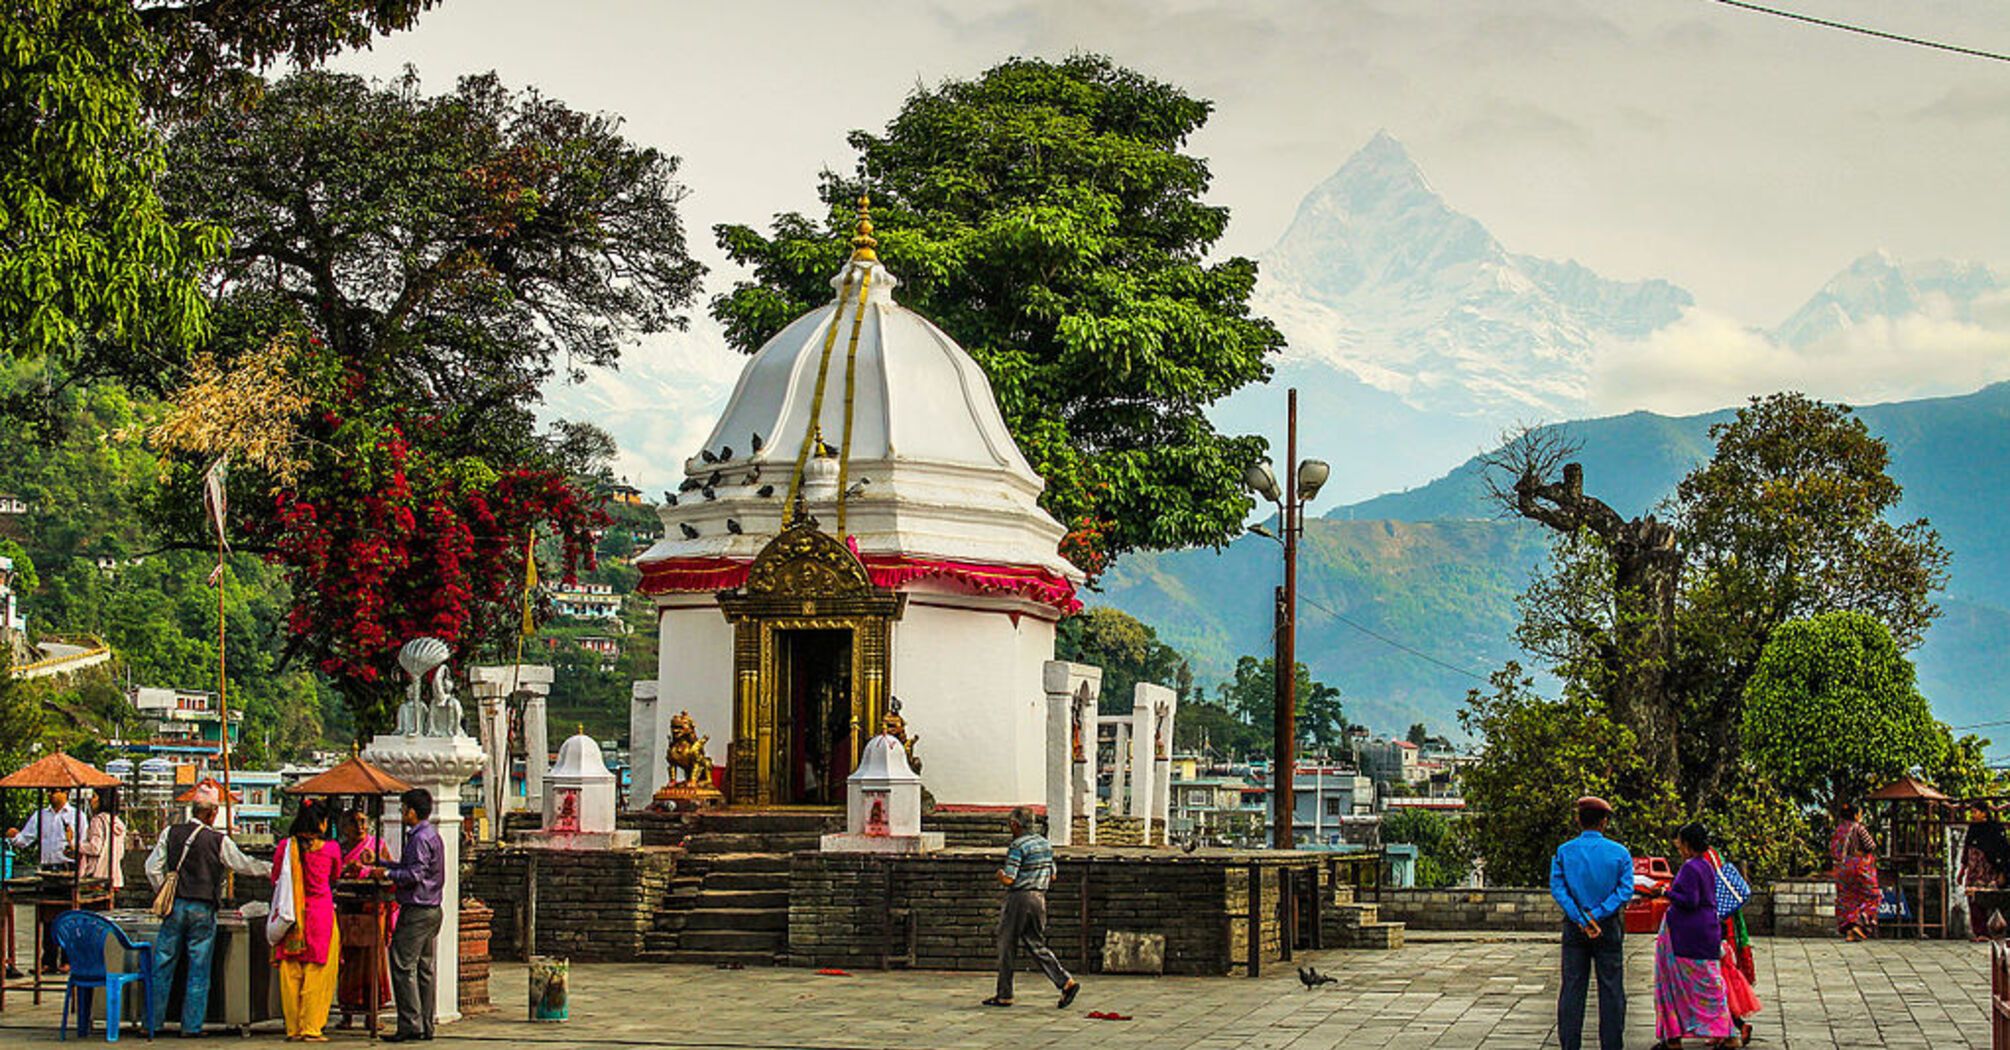 Pokhara has been declared the official tourism capital of Nepal